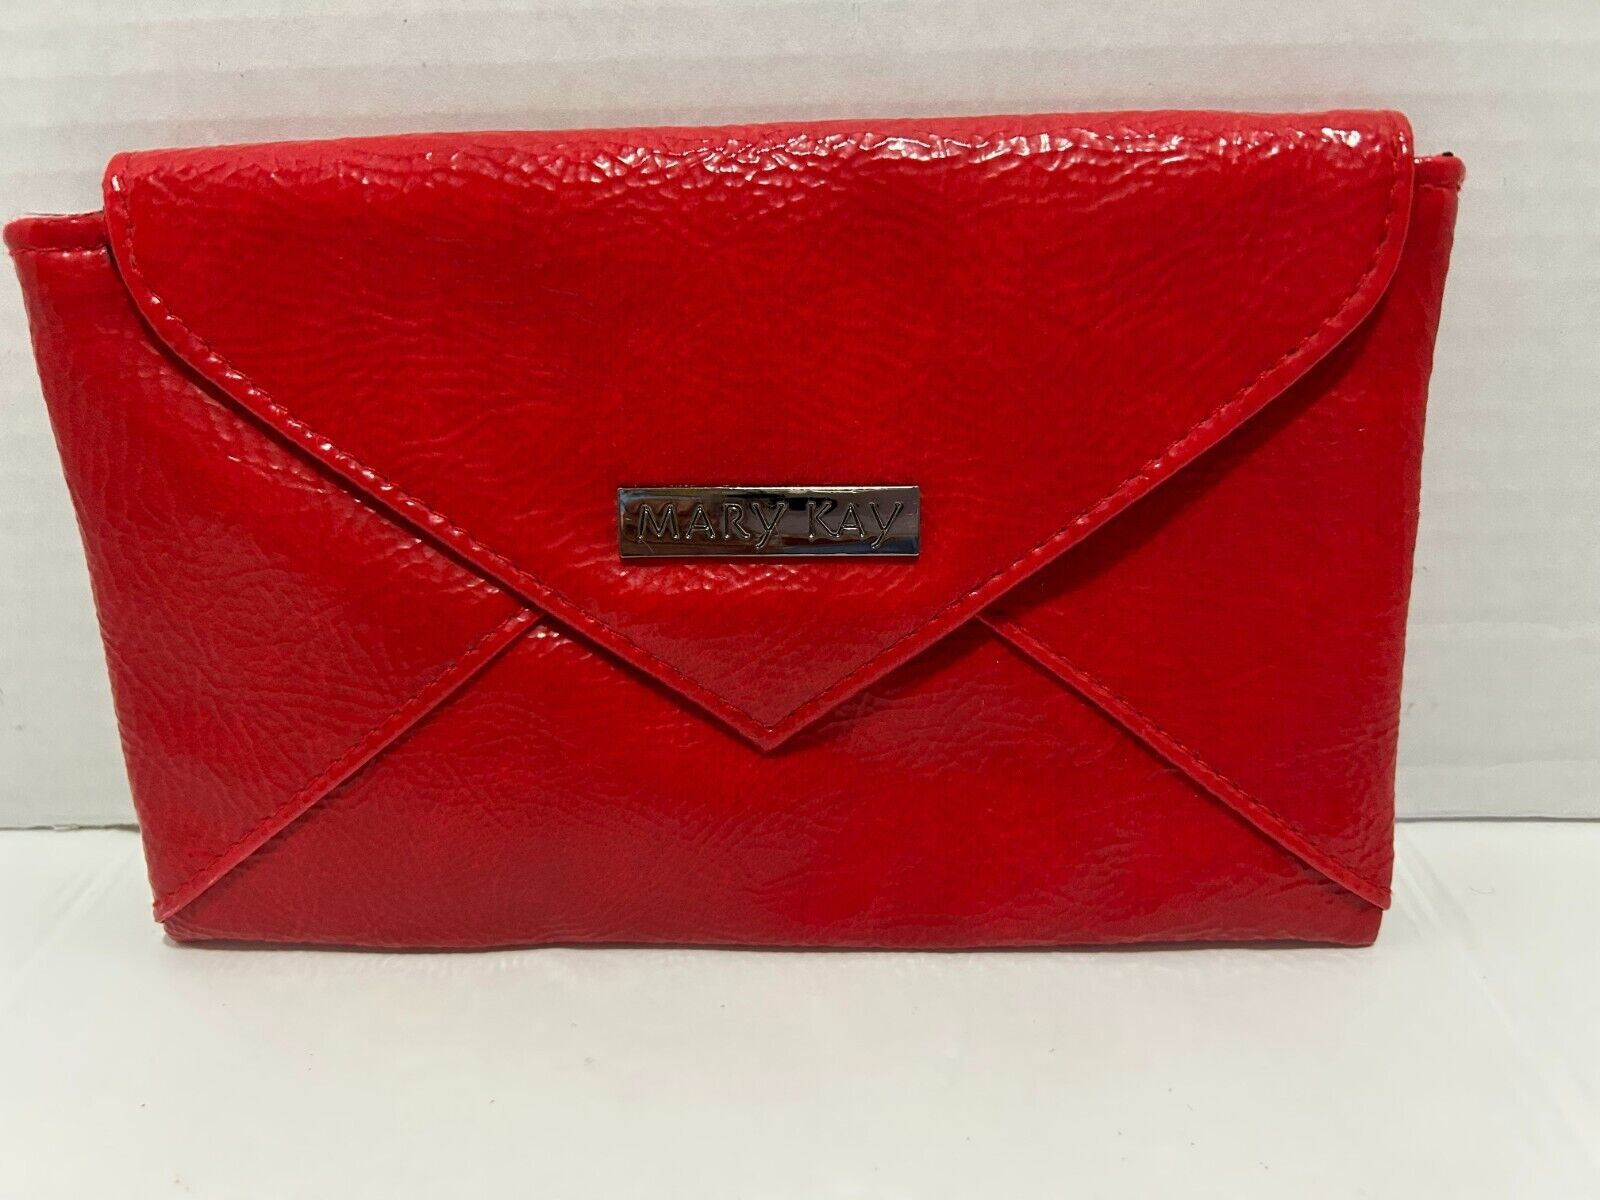 Mary Kay Red Pebbled Leather Makeup Bag Clutch Travel 7 1/2" X 5" - $5.45